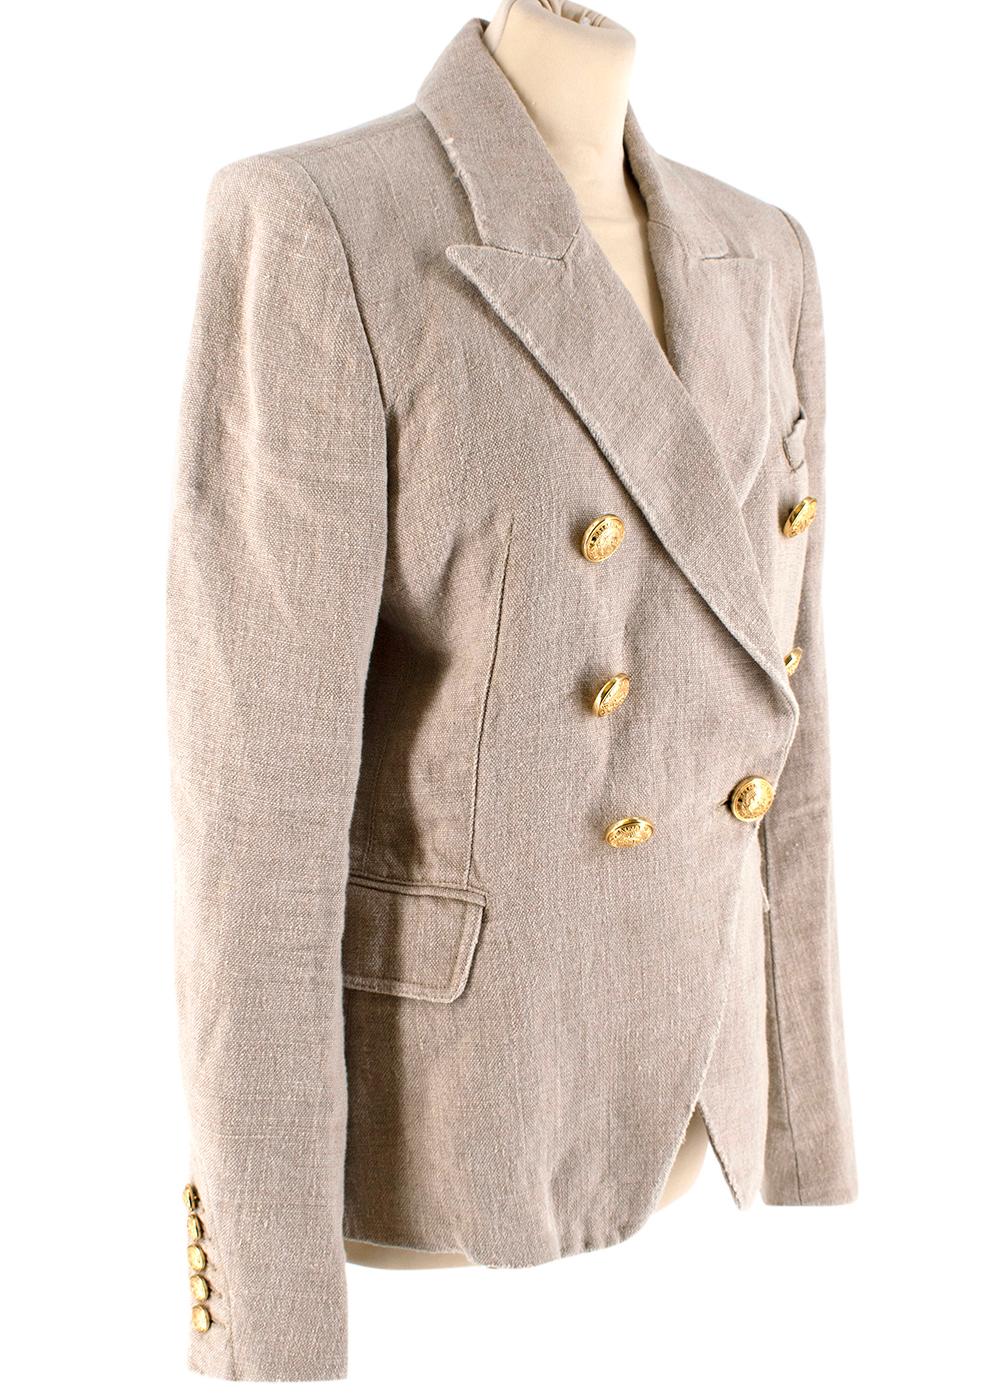 Balmain Beige Linen Double-Breasted Blazer

- Natural, mid-weight linen fabric
- Lavish gold-toned buttons on front
- Padded shoulders
- Five buttons on cuffs
- Two flattering flap front pockets
- Left chest pocket
- Fully lined

Materials: 100%